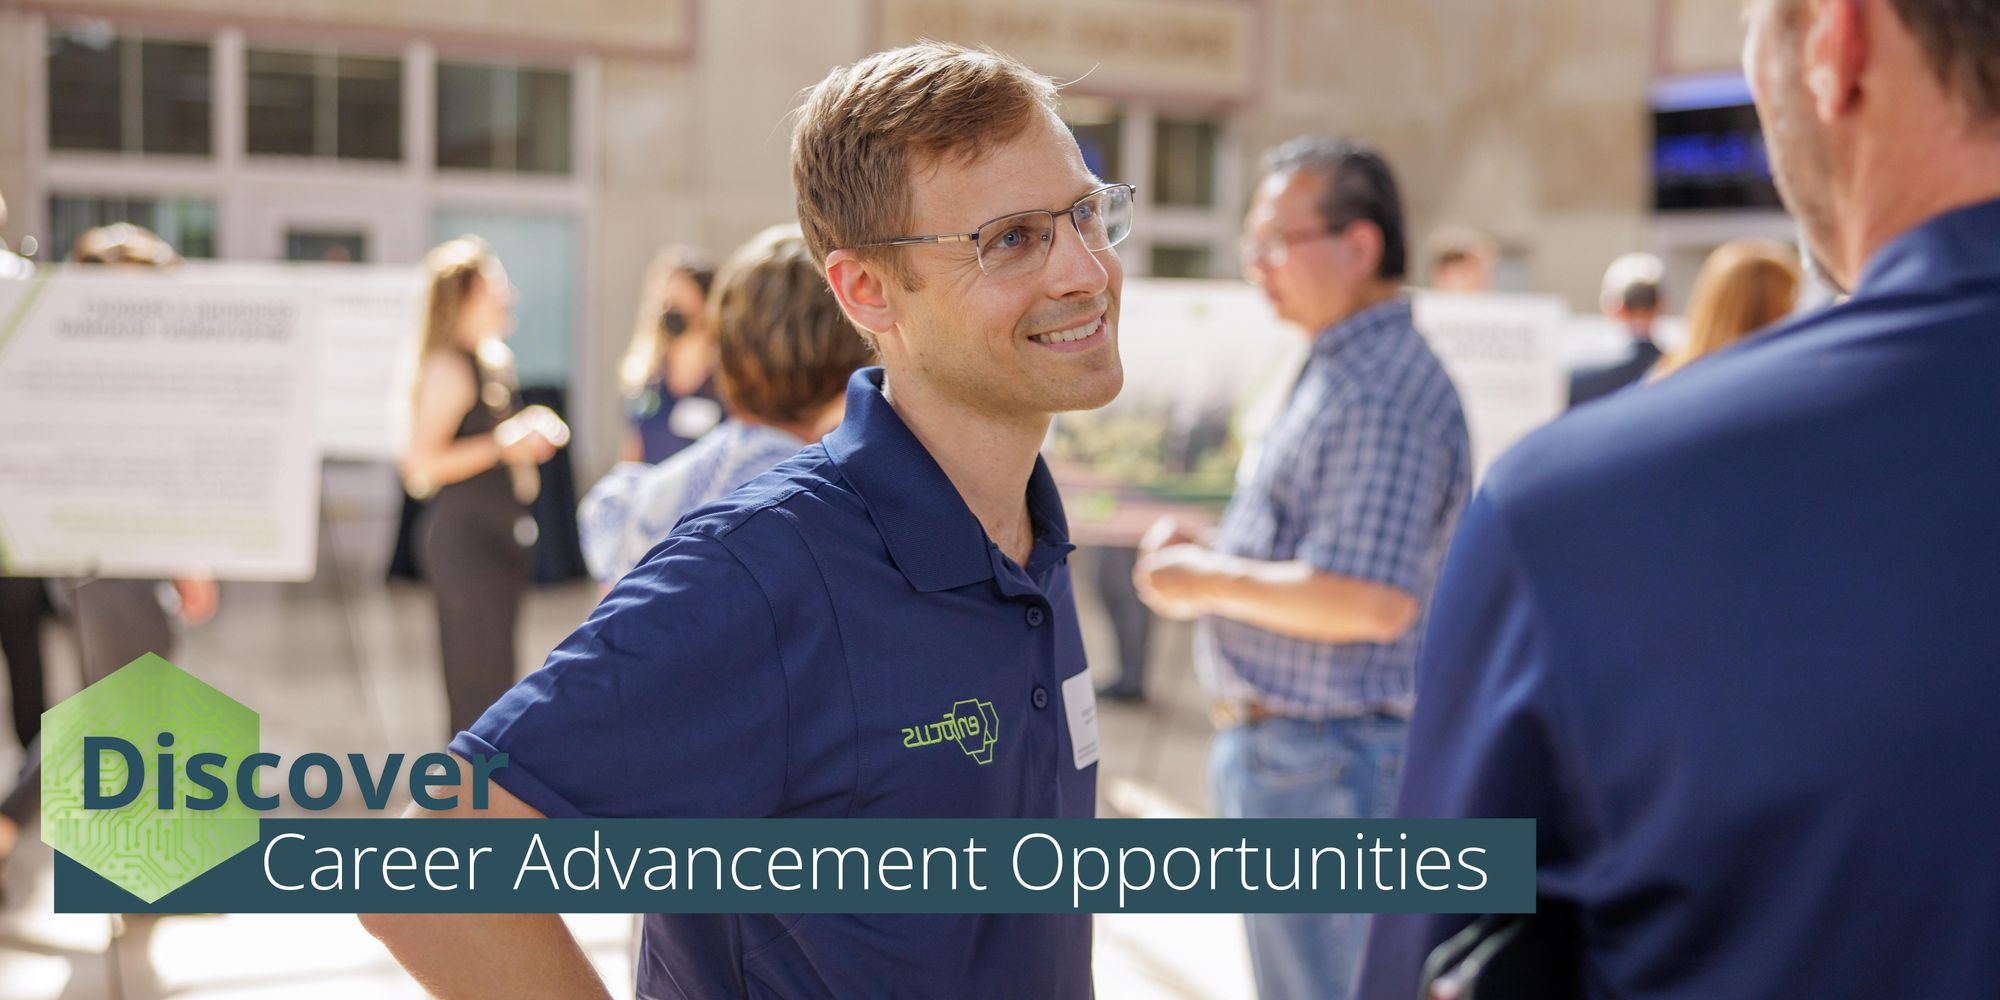 Discover Career Advancement Opportunities: Expansion of Programming and Professional Development for Fellow Growth